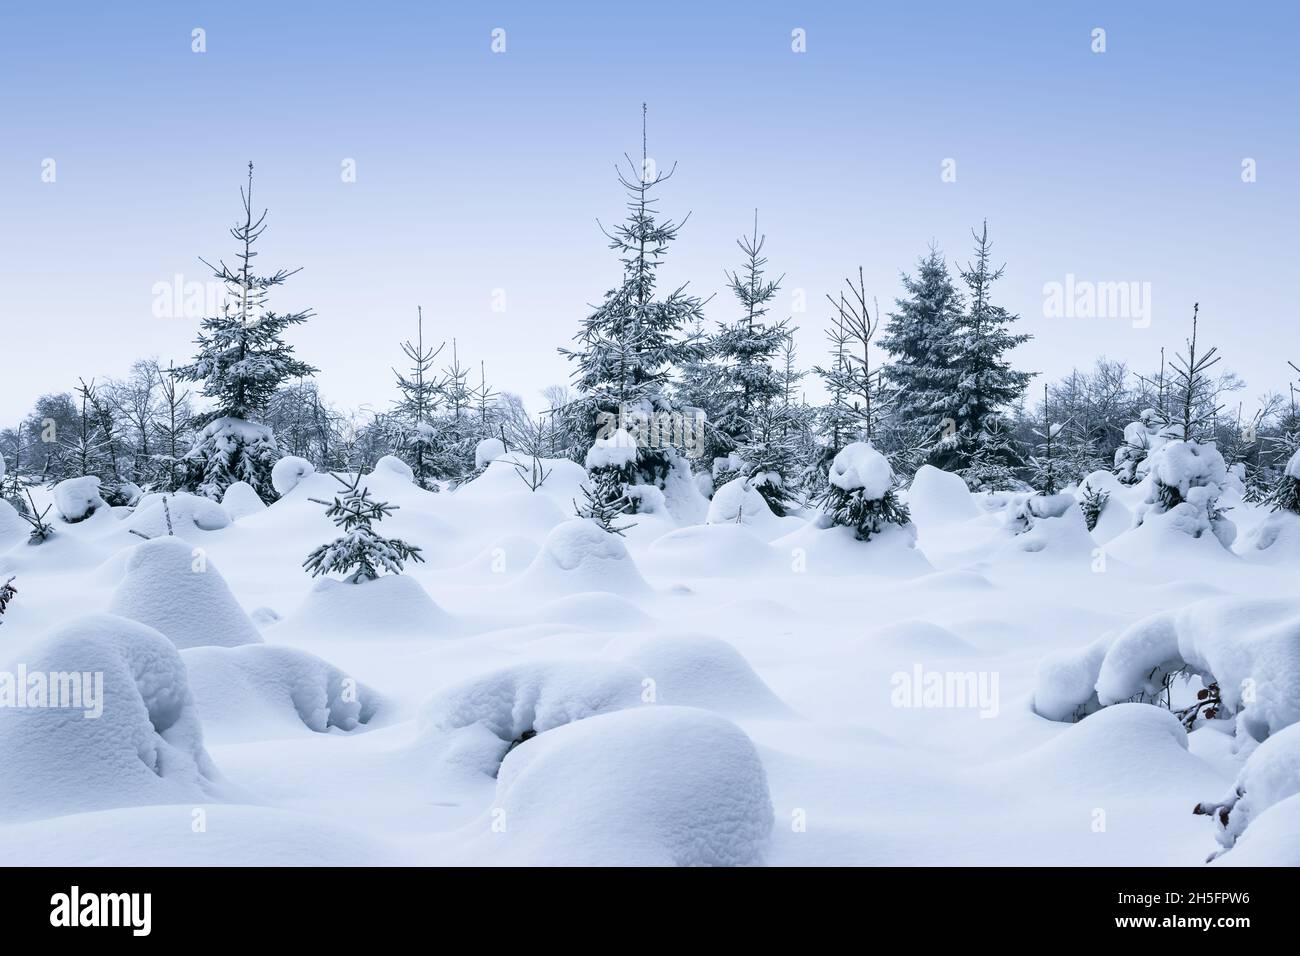 Snow covered trees in magical winter forest. Stock Photo